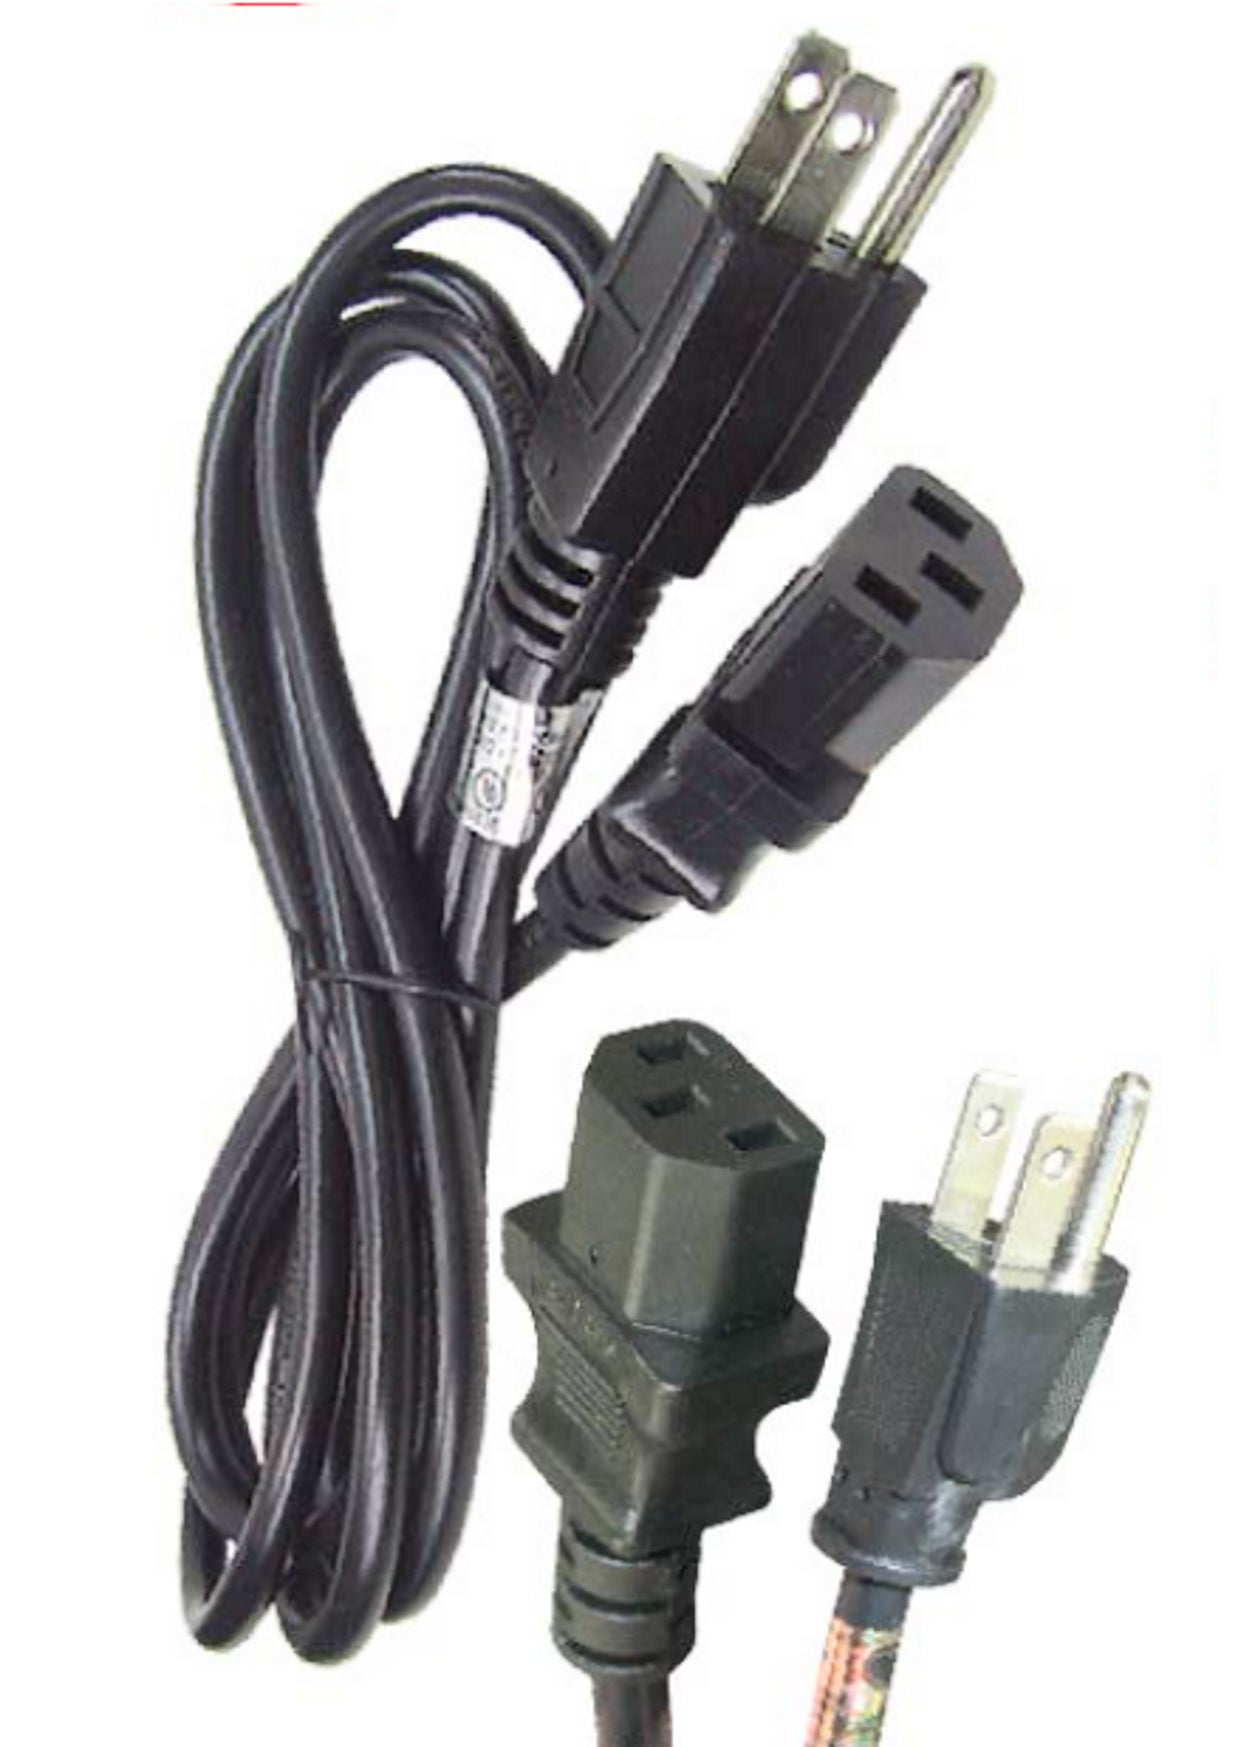 Computer Power Cord, Universal Perfect for TVs, computers, and other gadgets, Black, 6 Feet (1.82 Meters)